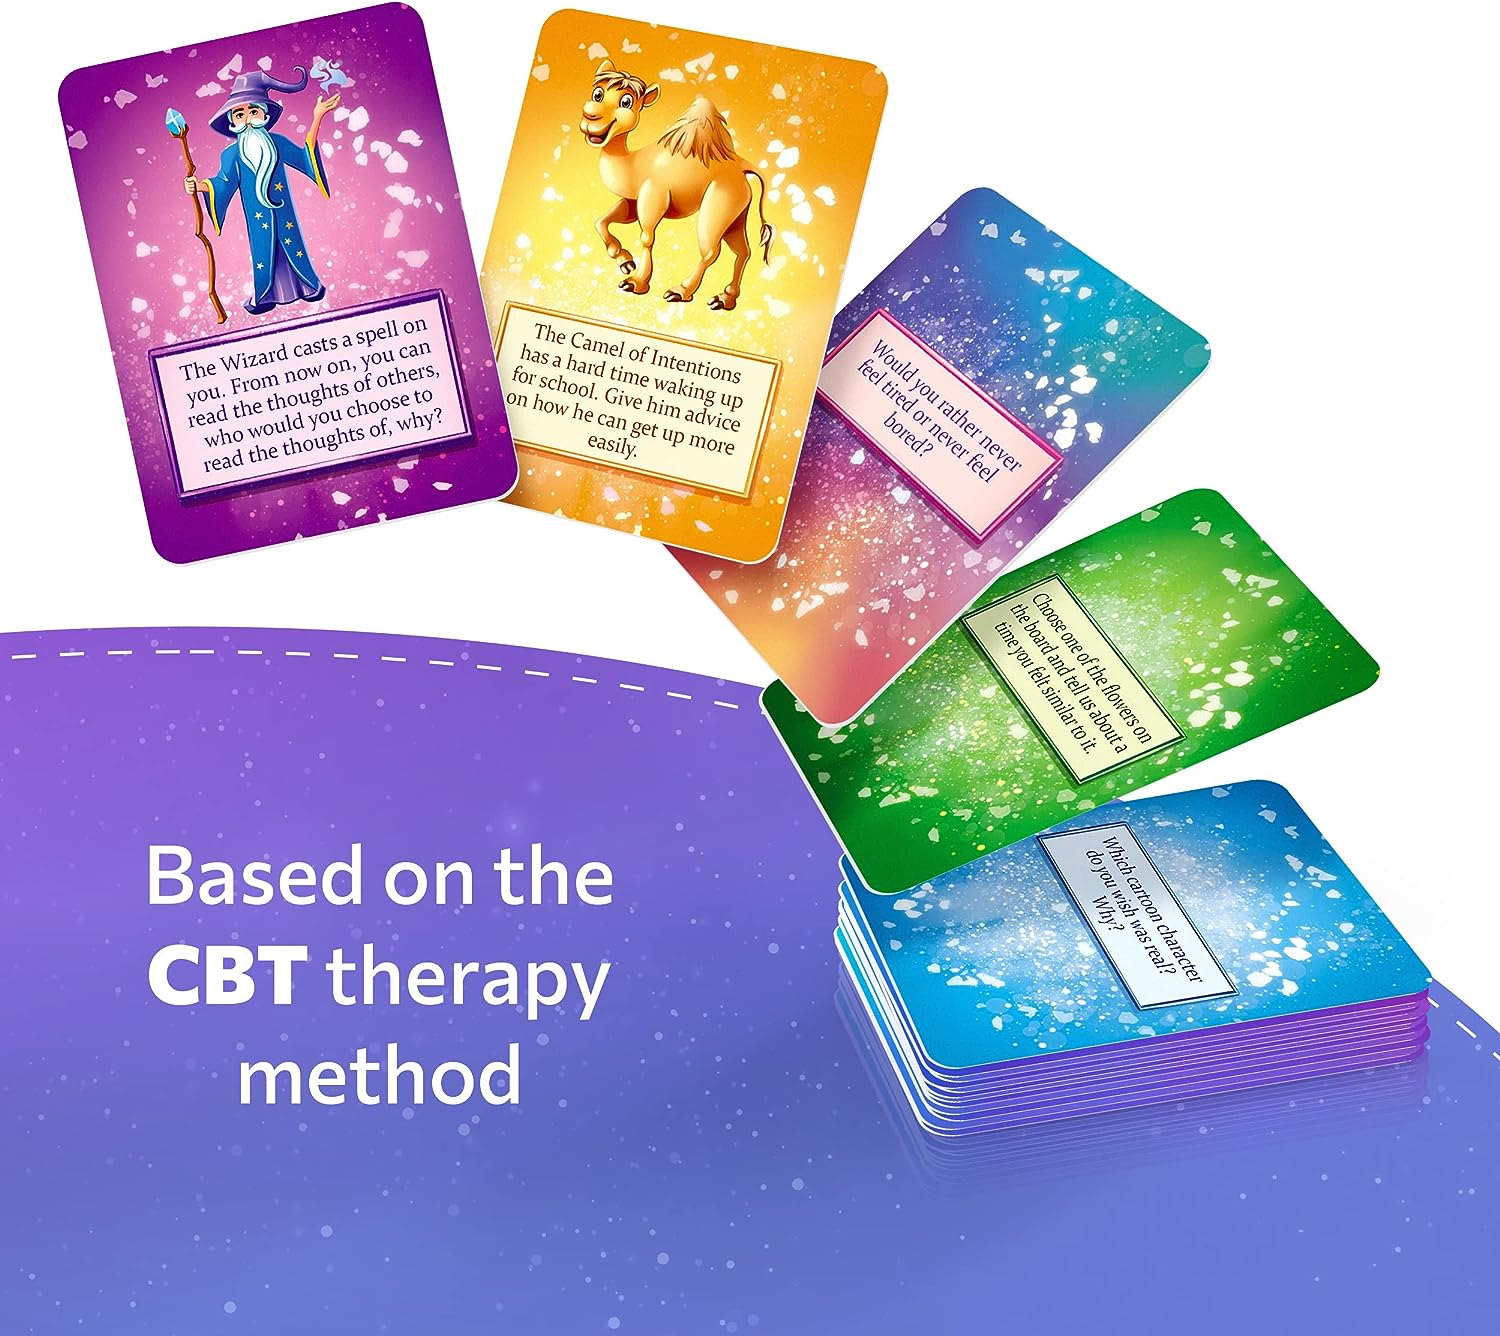 CBTrail Therapy Game for Kids - CBT Emotional Game to Develop Social Skills and Emotional Intelligence - Recovery Board Game for Counselors, Anger, Occupational and Group Therapy, ADHD, and Autism